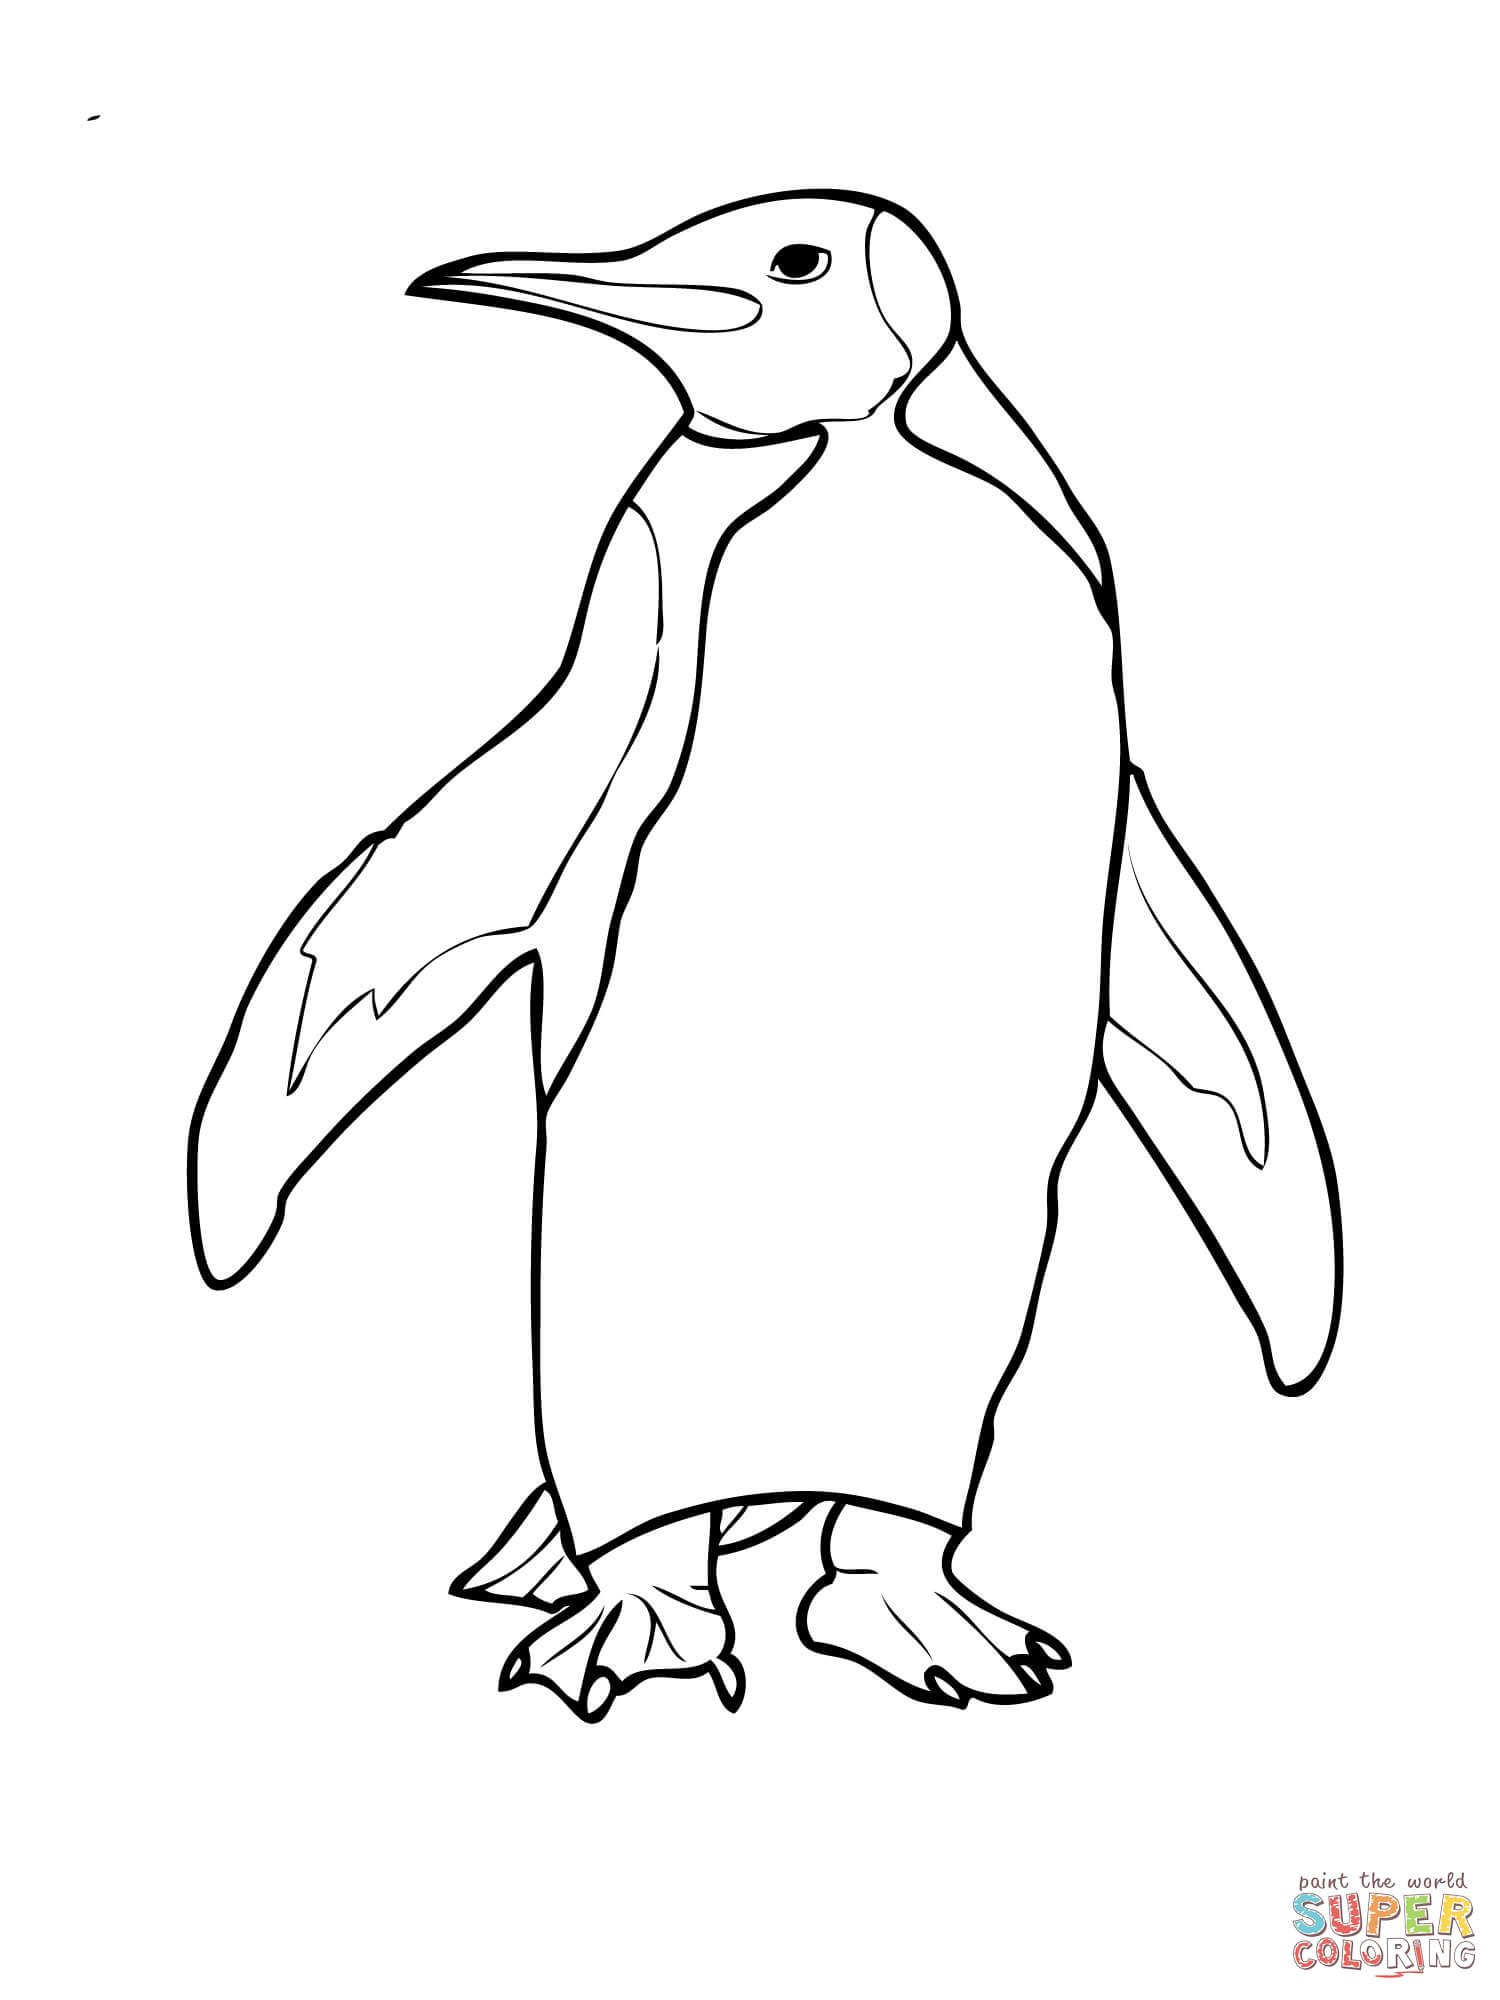 Adelie Penguin Coloring Page   Coloring Home